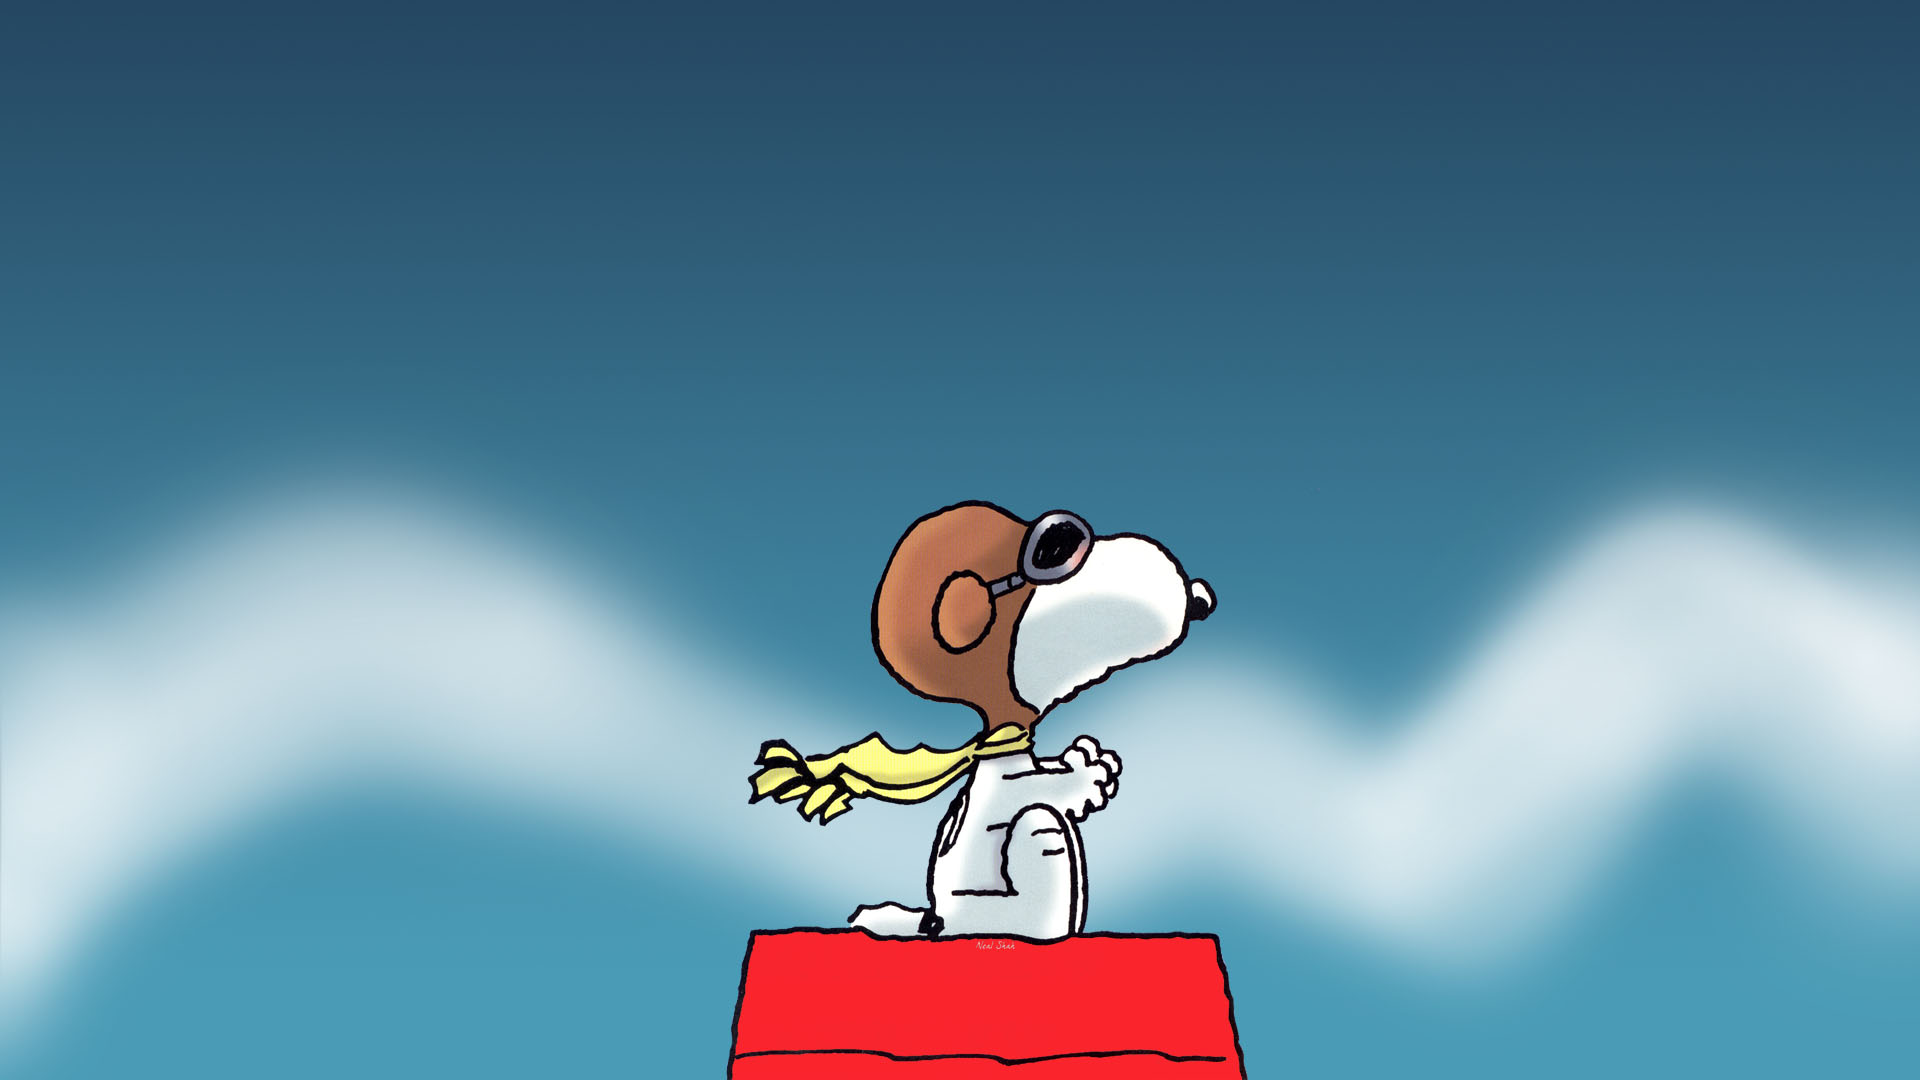 Snoopy wallpaper background 1920x1080